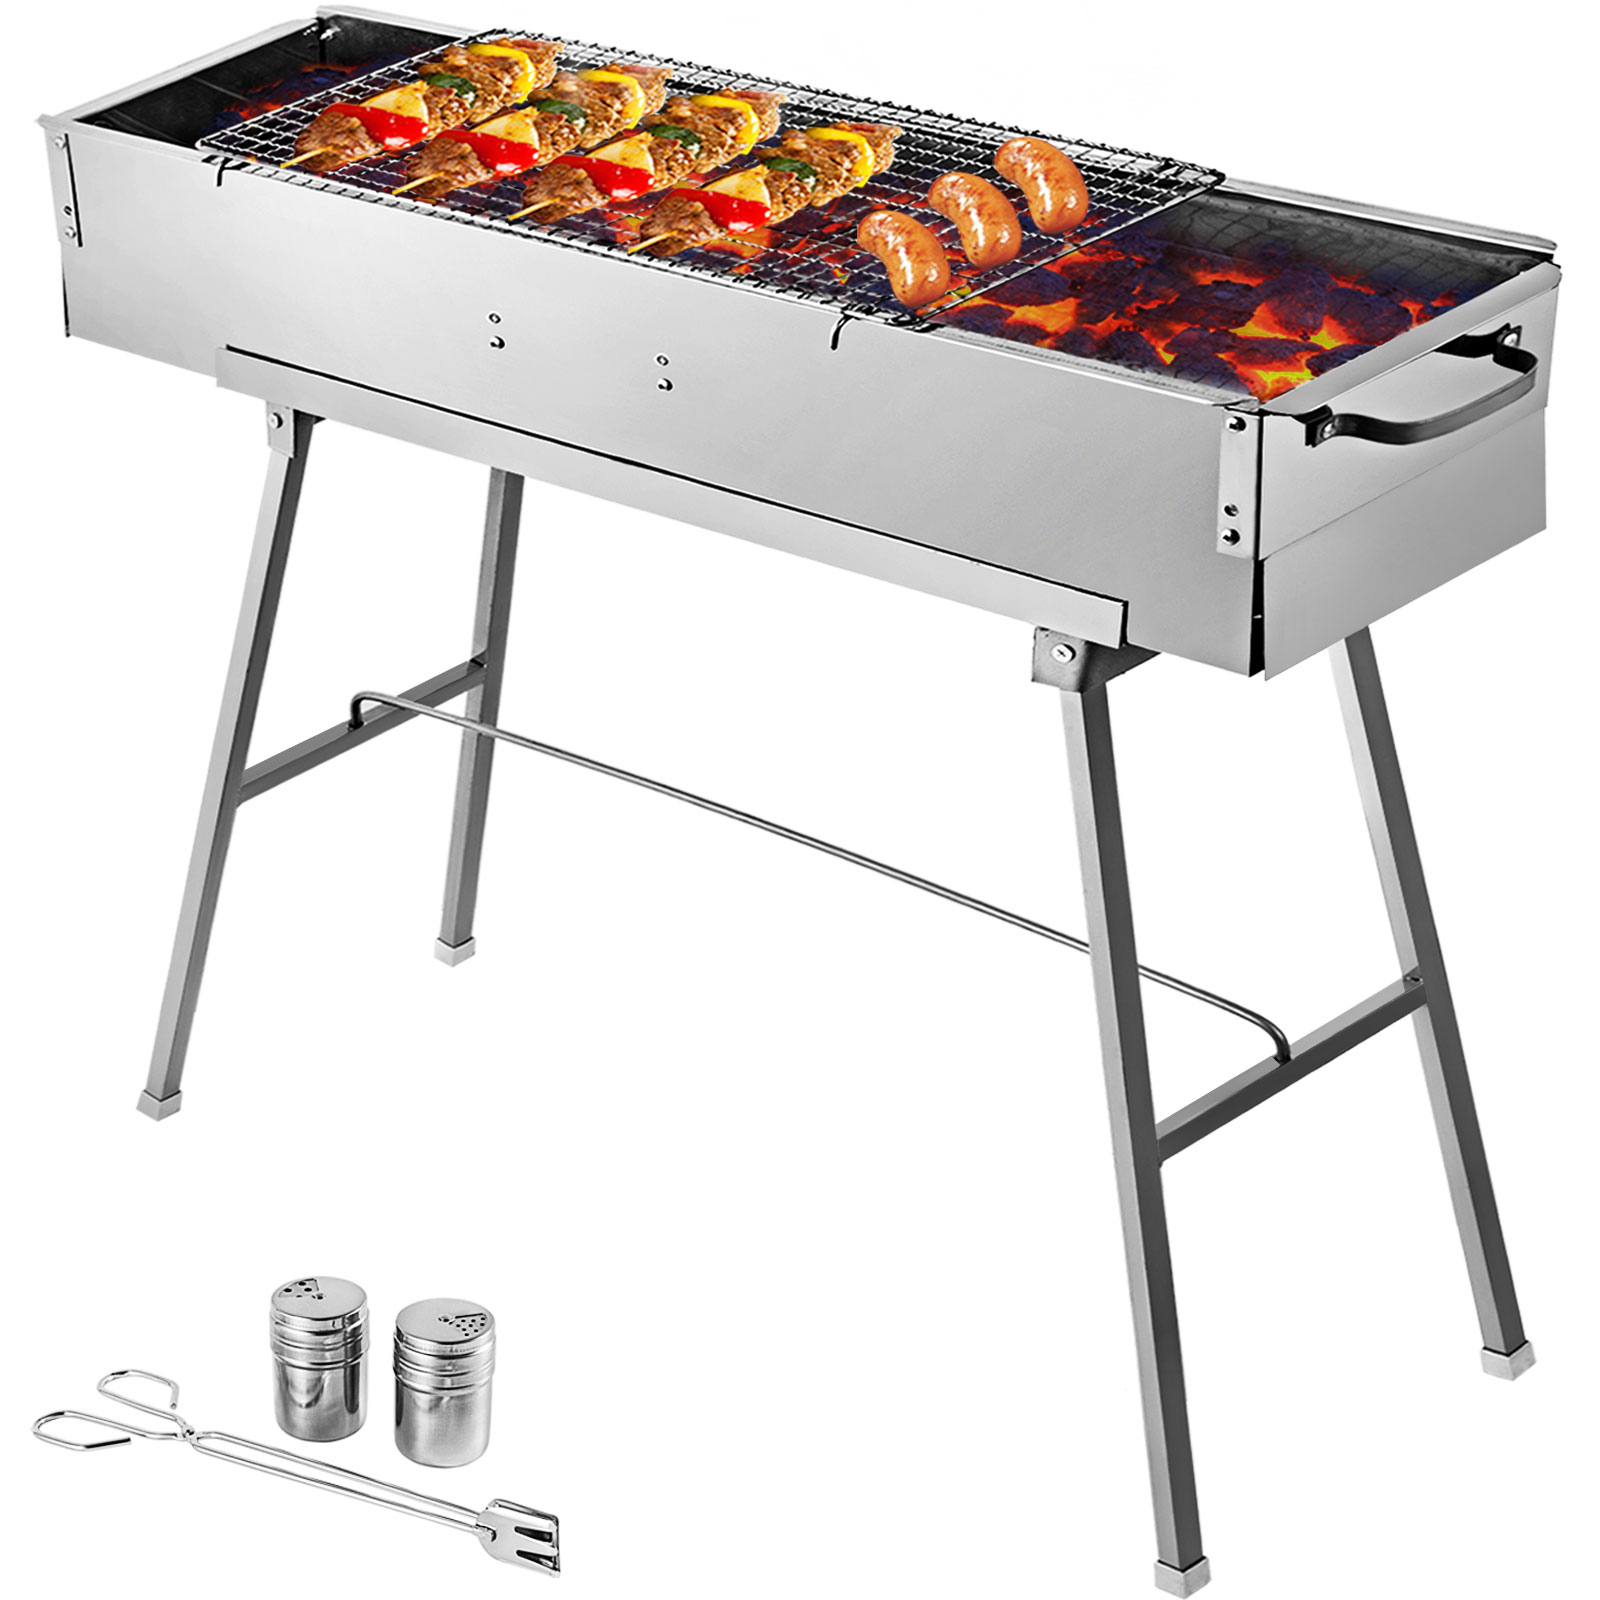 Party Griller 32 Stainless Steel Charcoal Grill Bbq Grill Camp Grill Portable от Vevor Many GEOs